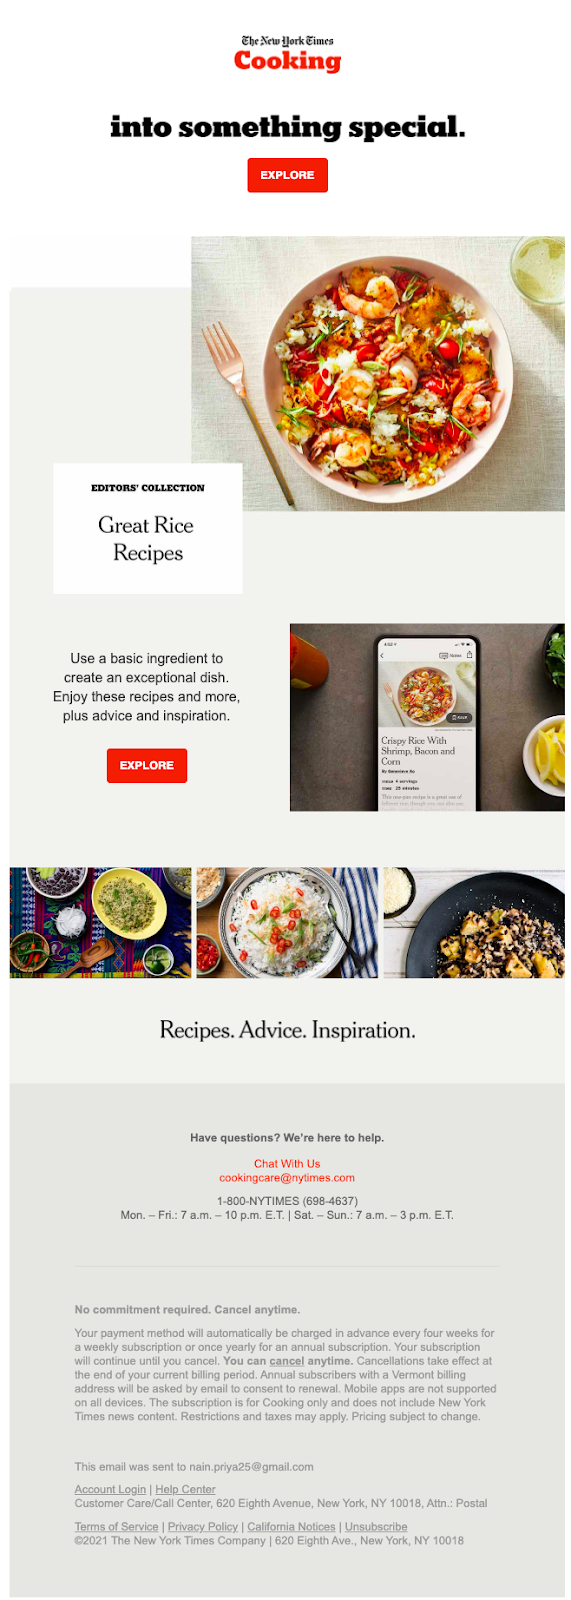 Email newsletter design of New York Times